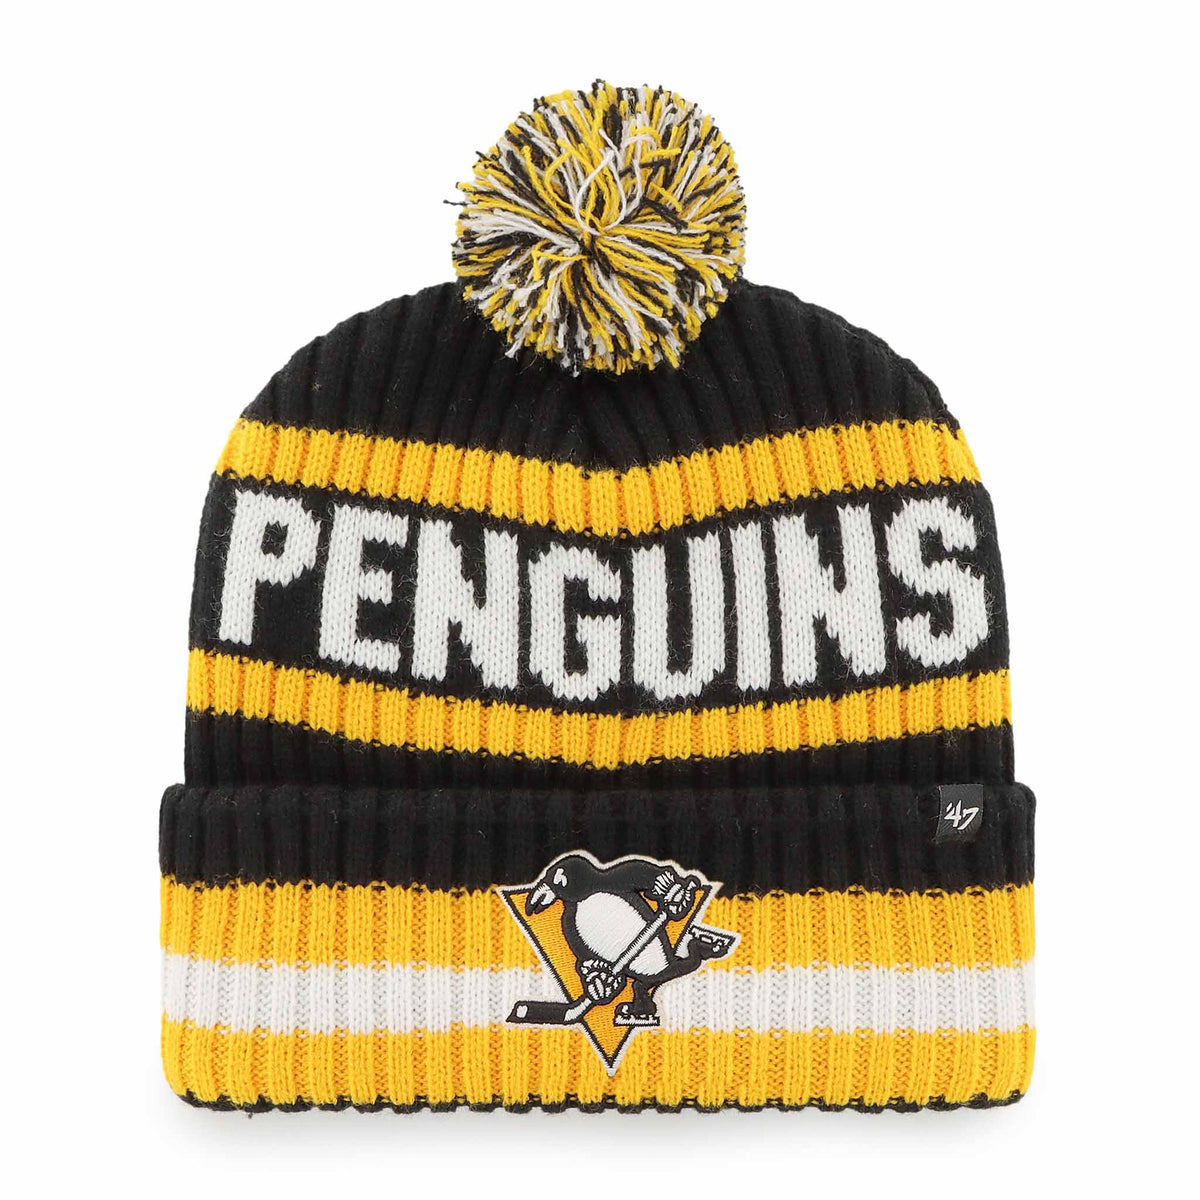 47 Brand Tuque a pompon Bering NHL Pittsburgh Penguins